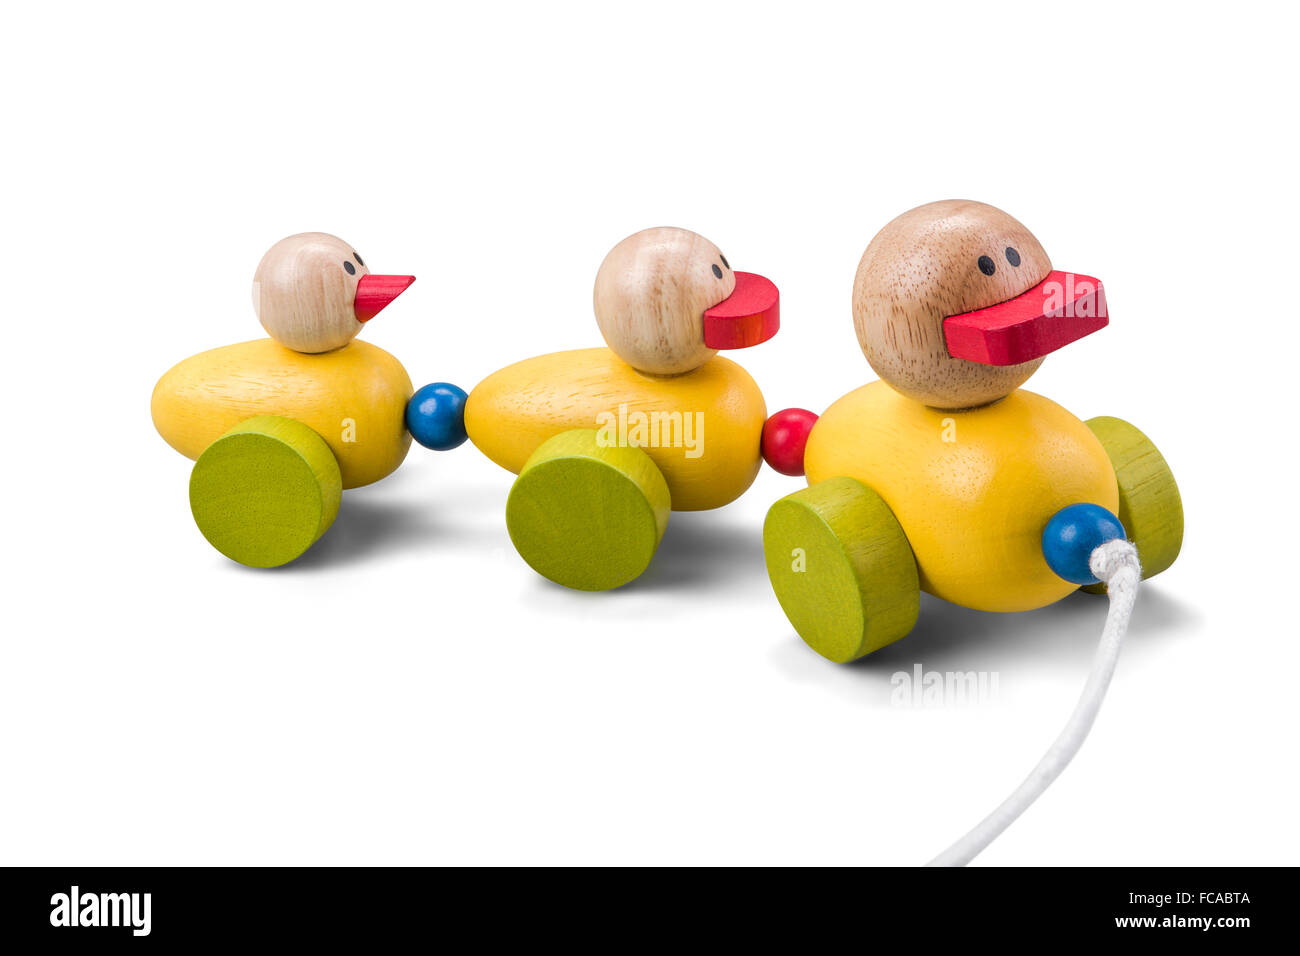 Wooden duck toy family train with colorful parts isolated over white with clipping path Stock Photo